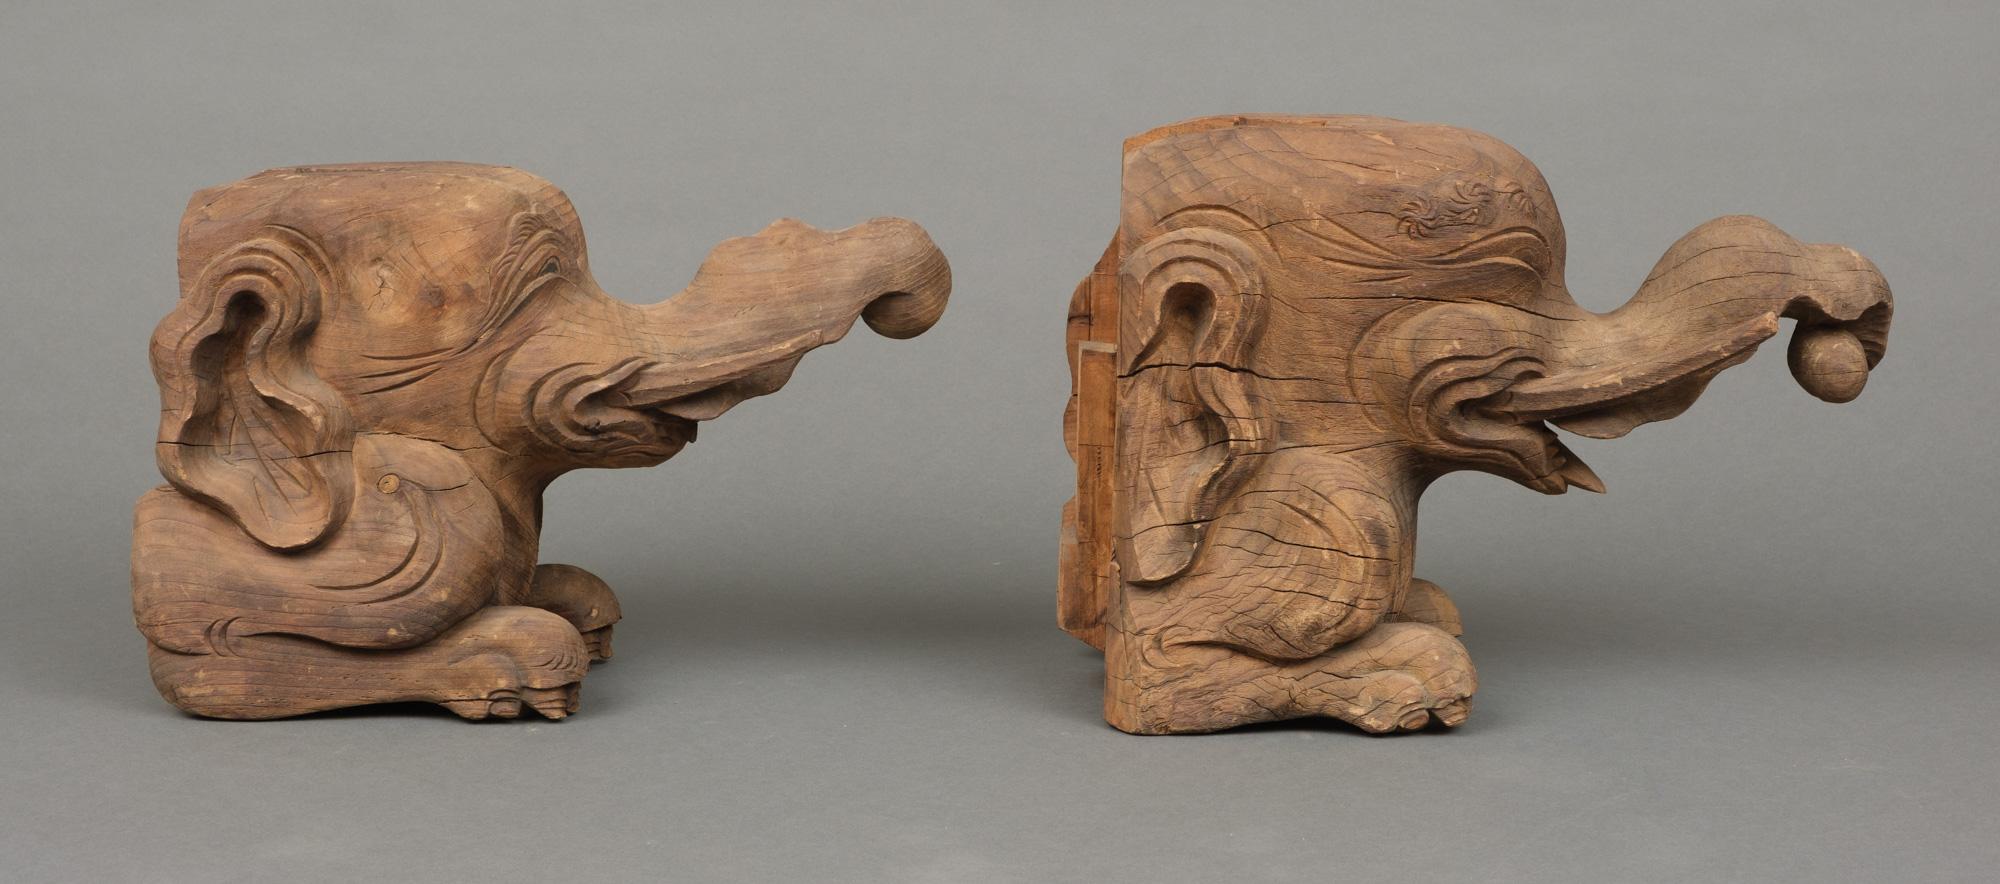 Pair of Japanese Carved Wooden Temple Ornaments 木鼻 'Kibana' Shaped like Baku 獏 In Good Condition For Sale In Amsterdam, NL